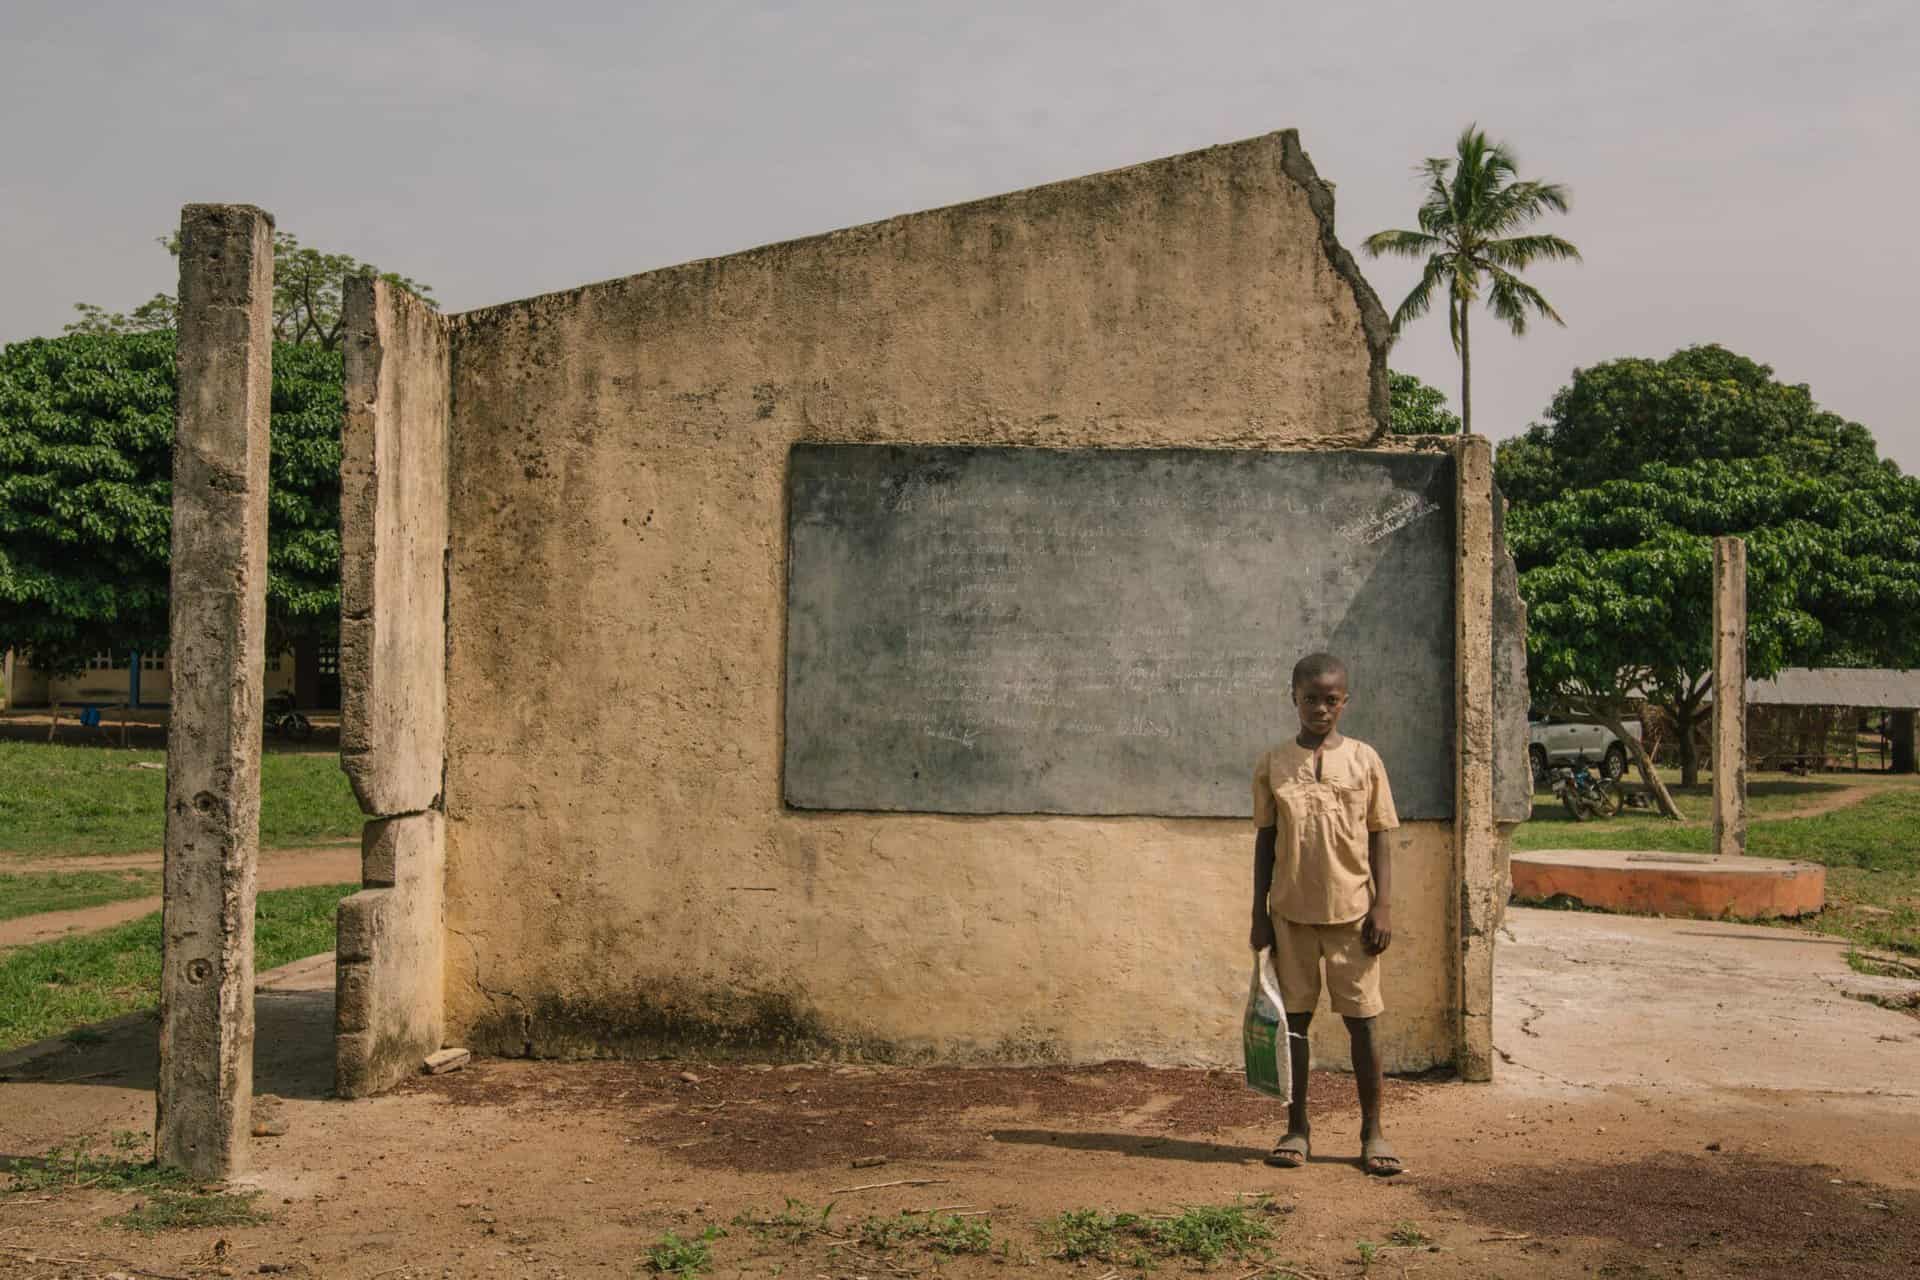 In Benin, a community goes into agriculture to pay for children's school fees